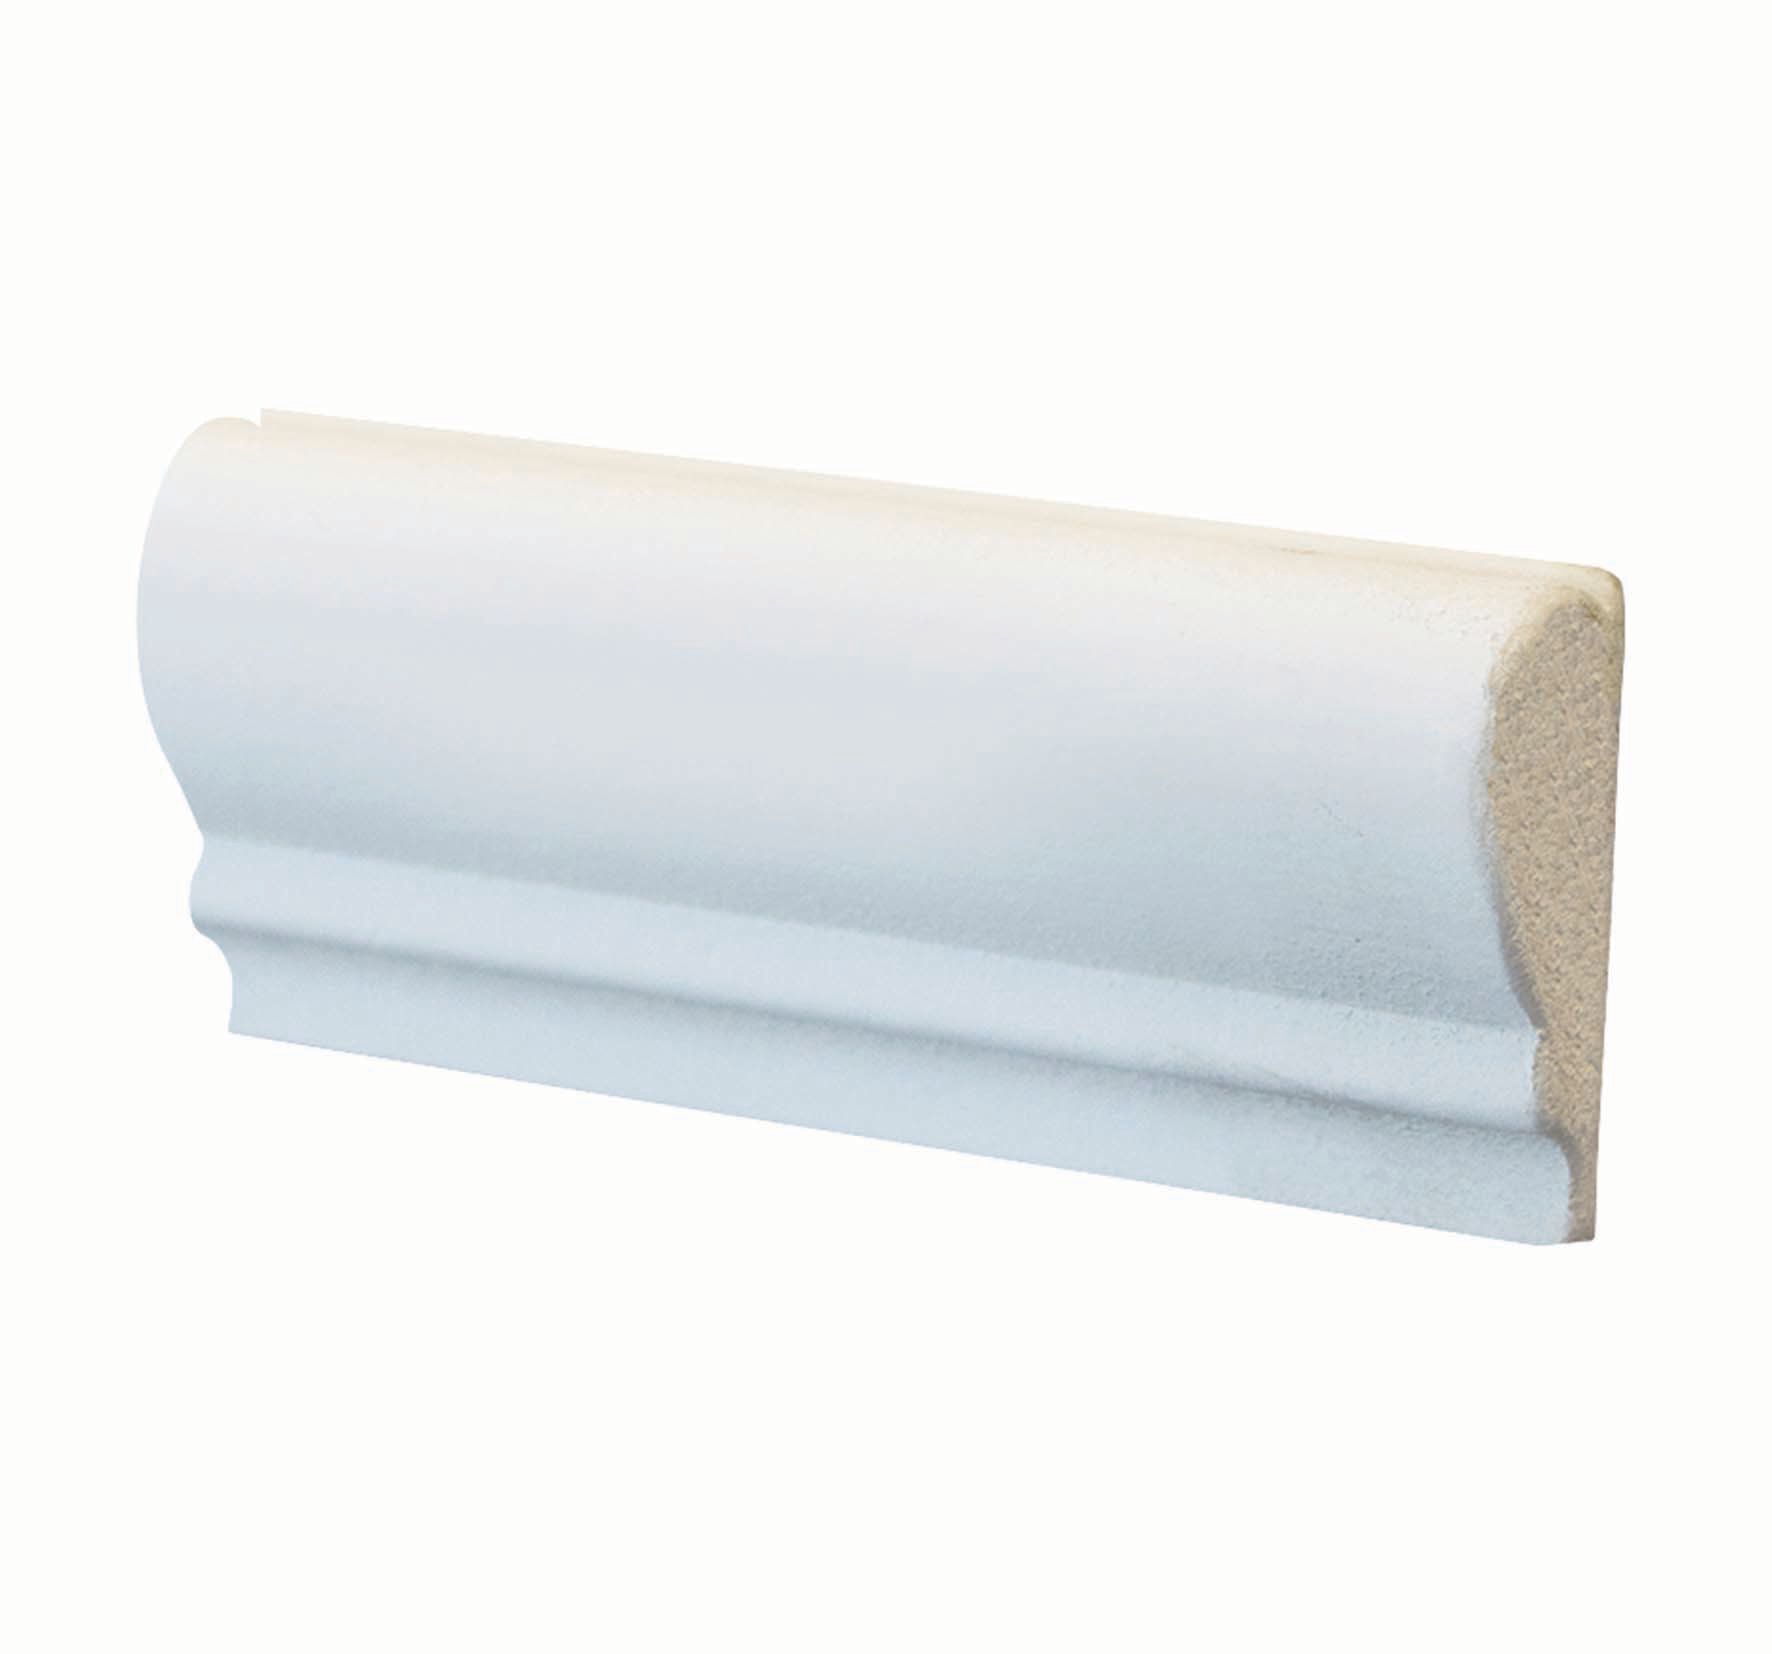 Image of Wickes Picture Rail Primed MDF - 18mm x 44mm x 2.4m Pack of 4